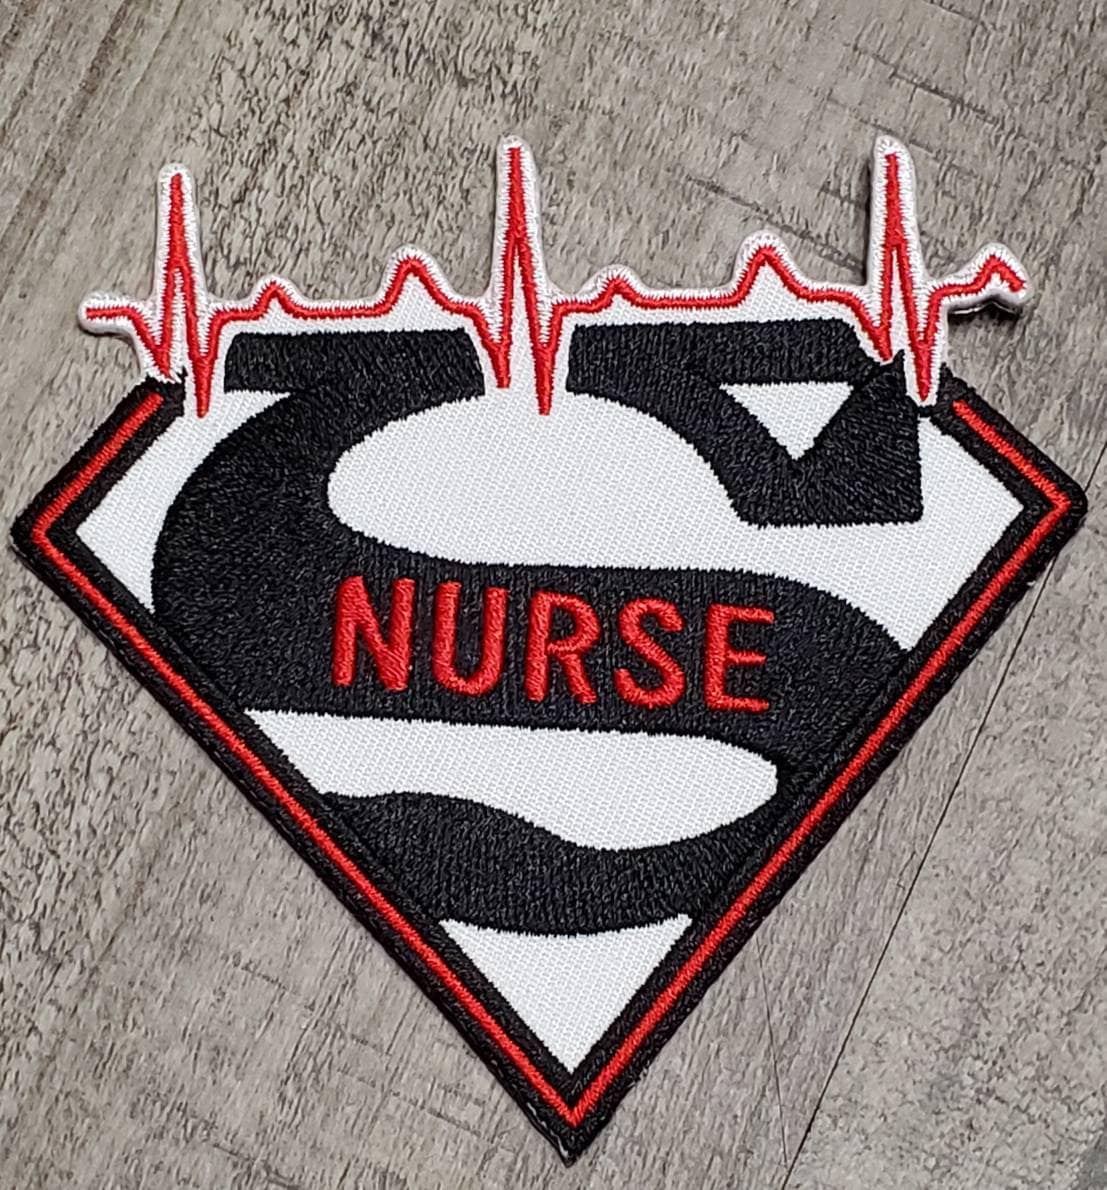 IRON ON PATCHES Superhero Embroidered Applique Patch DIY Clothes